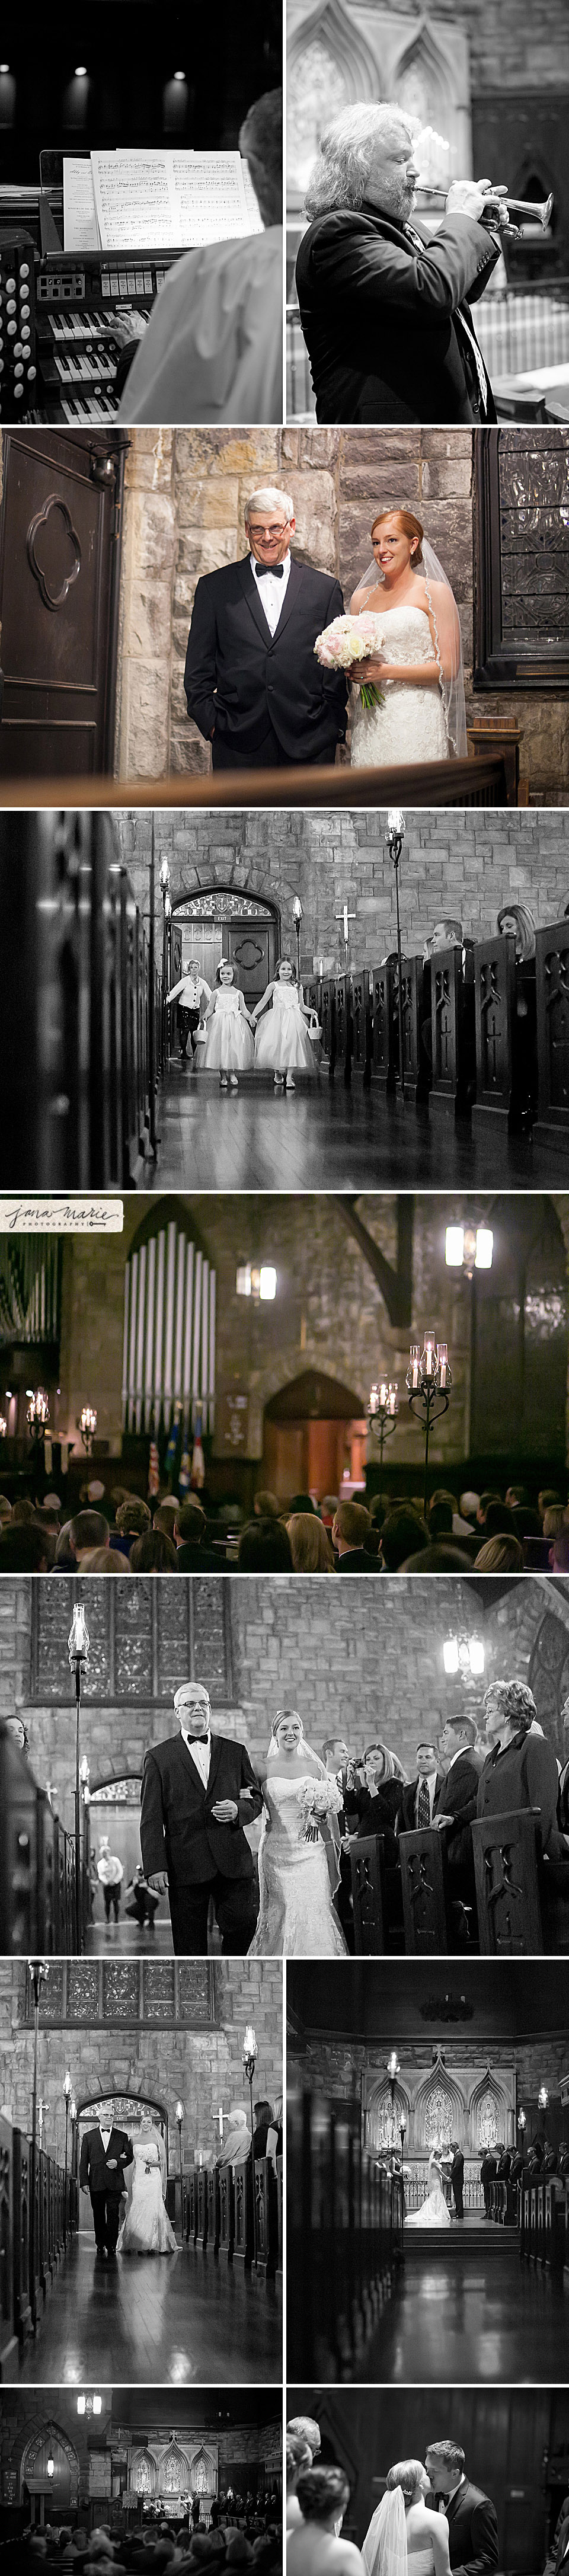 Candlelit ceremony, Old Churches, vintage weddings, Jana Marie Photography, first kiss